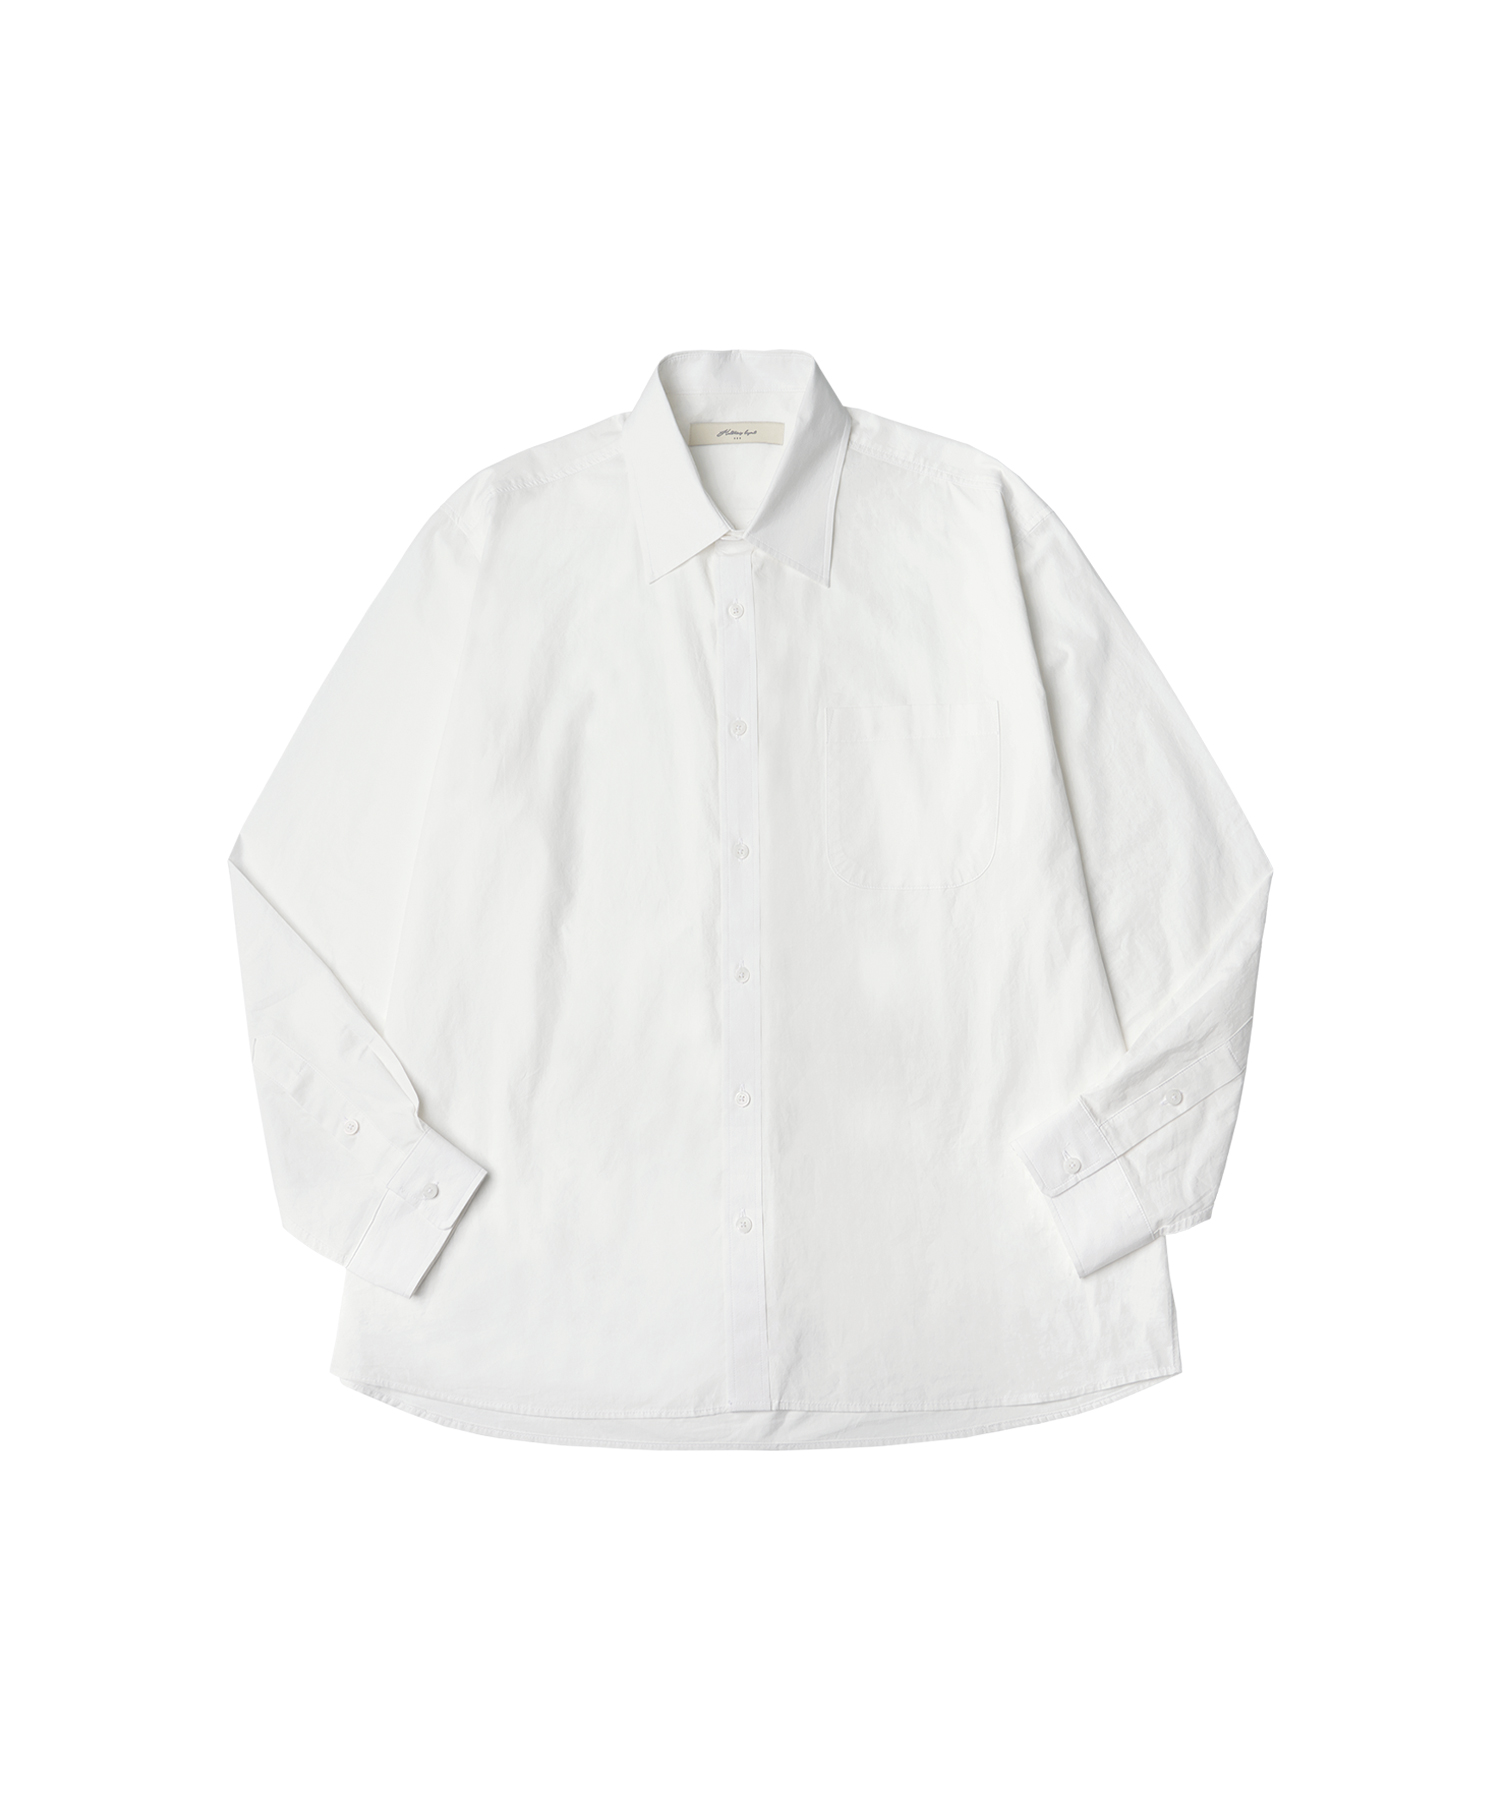 T20023 Dyeing color shirt_White